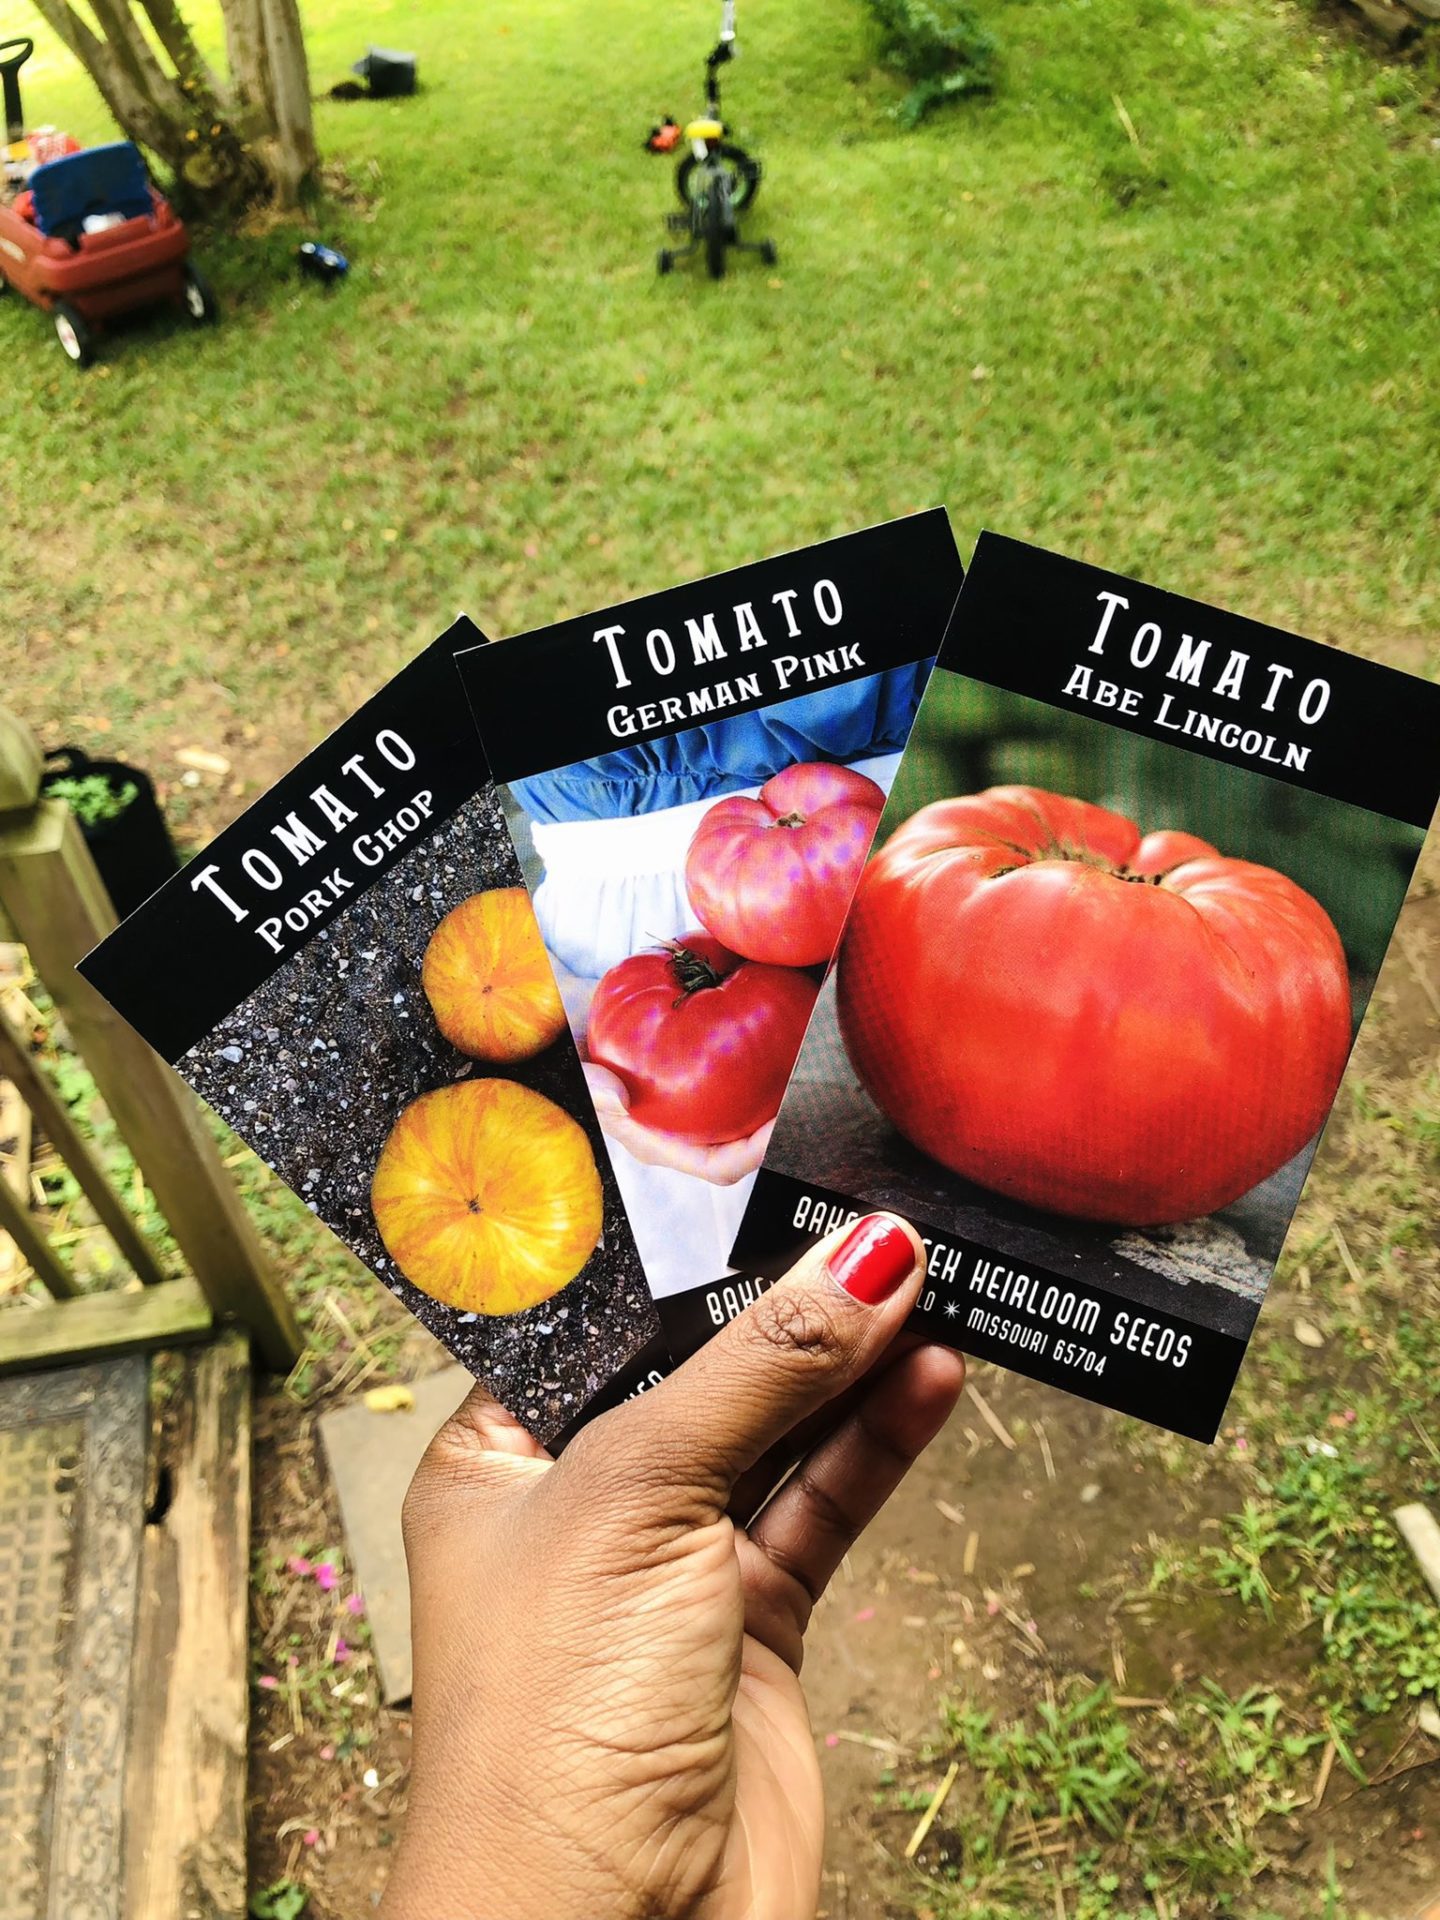 Tomato Planting Guide: Chakayla Gives 8 Tips for Planting Tomatoes